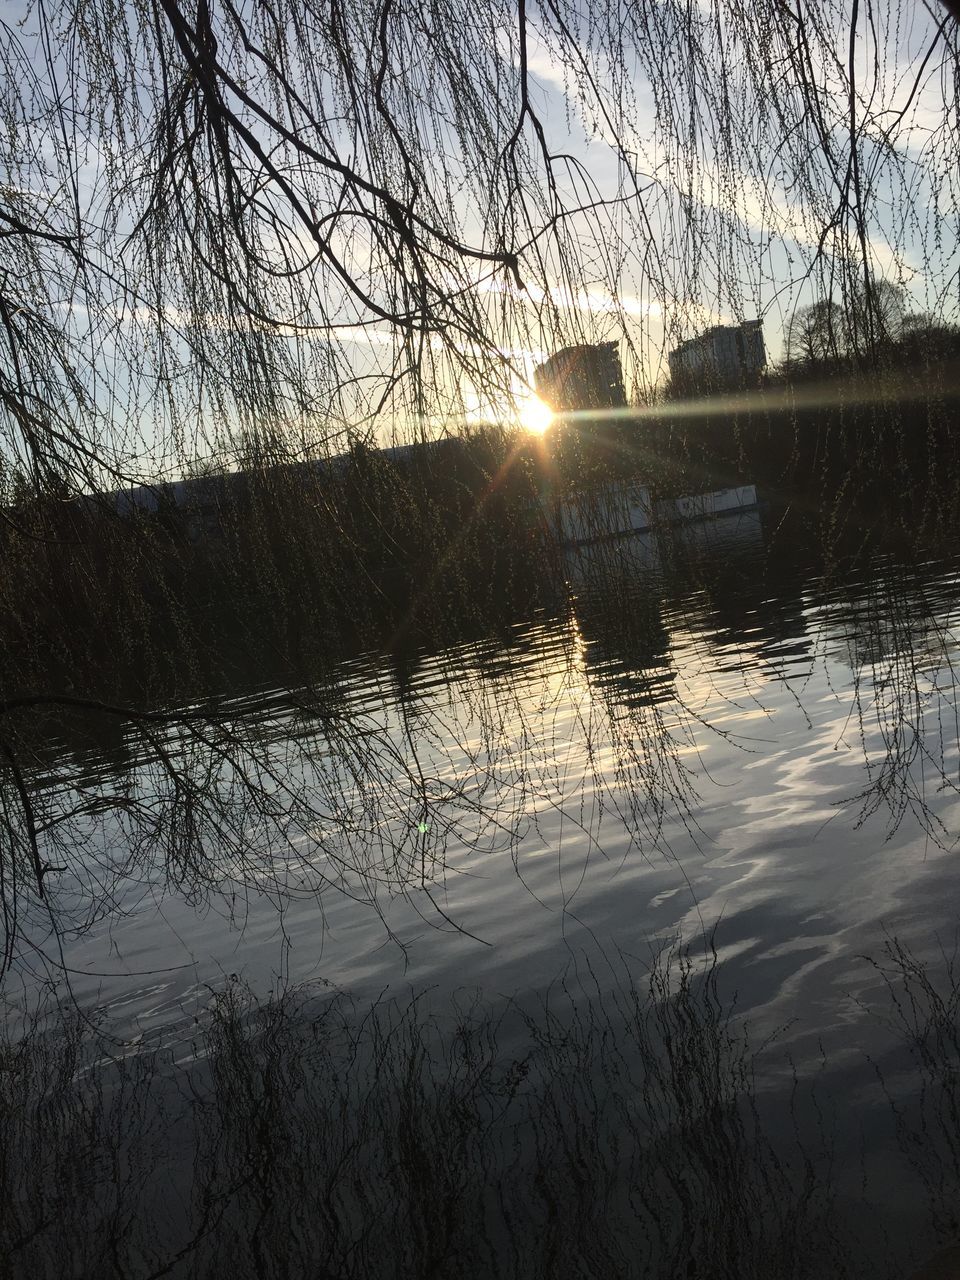 water, reflection, sky, tree, lake, plant, tranquility, scenics - nature, sun, no people, beauty in nature, tranquil scene, bare tree, nature, sunset, sunlight, lens flare, branch, sunbeam, outdoors, bright